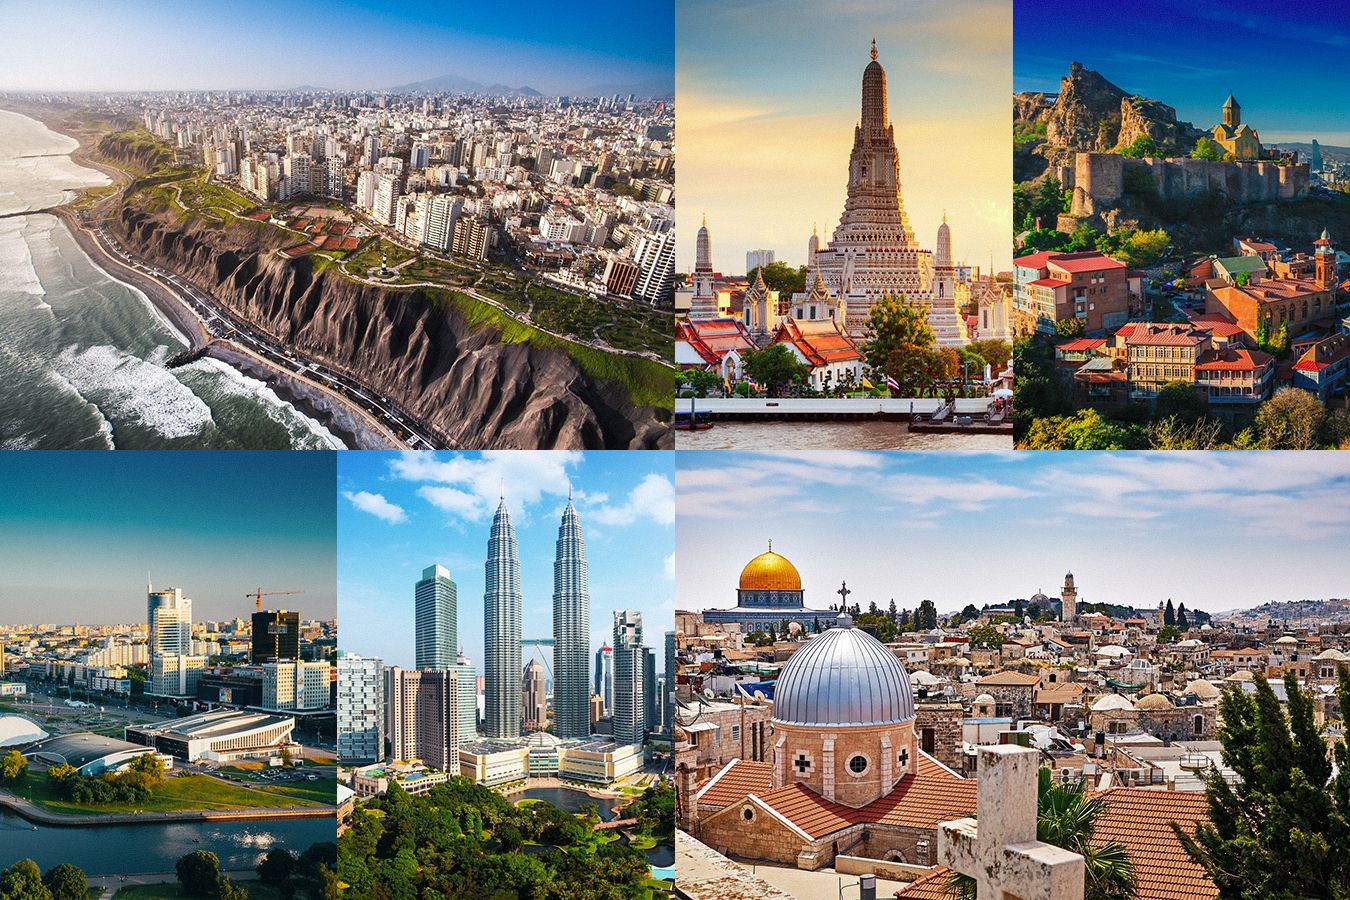 Geography quiz: Do you know the capital cities of the world’s countries?